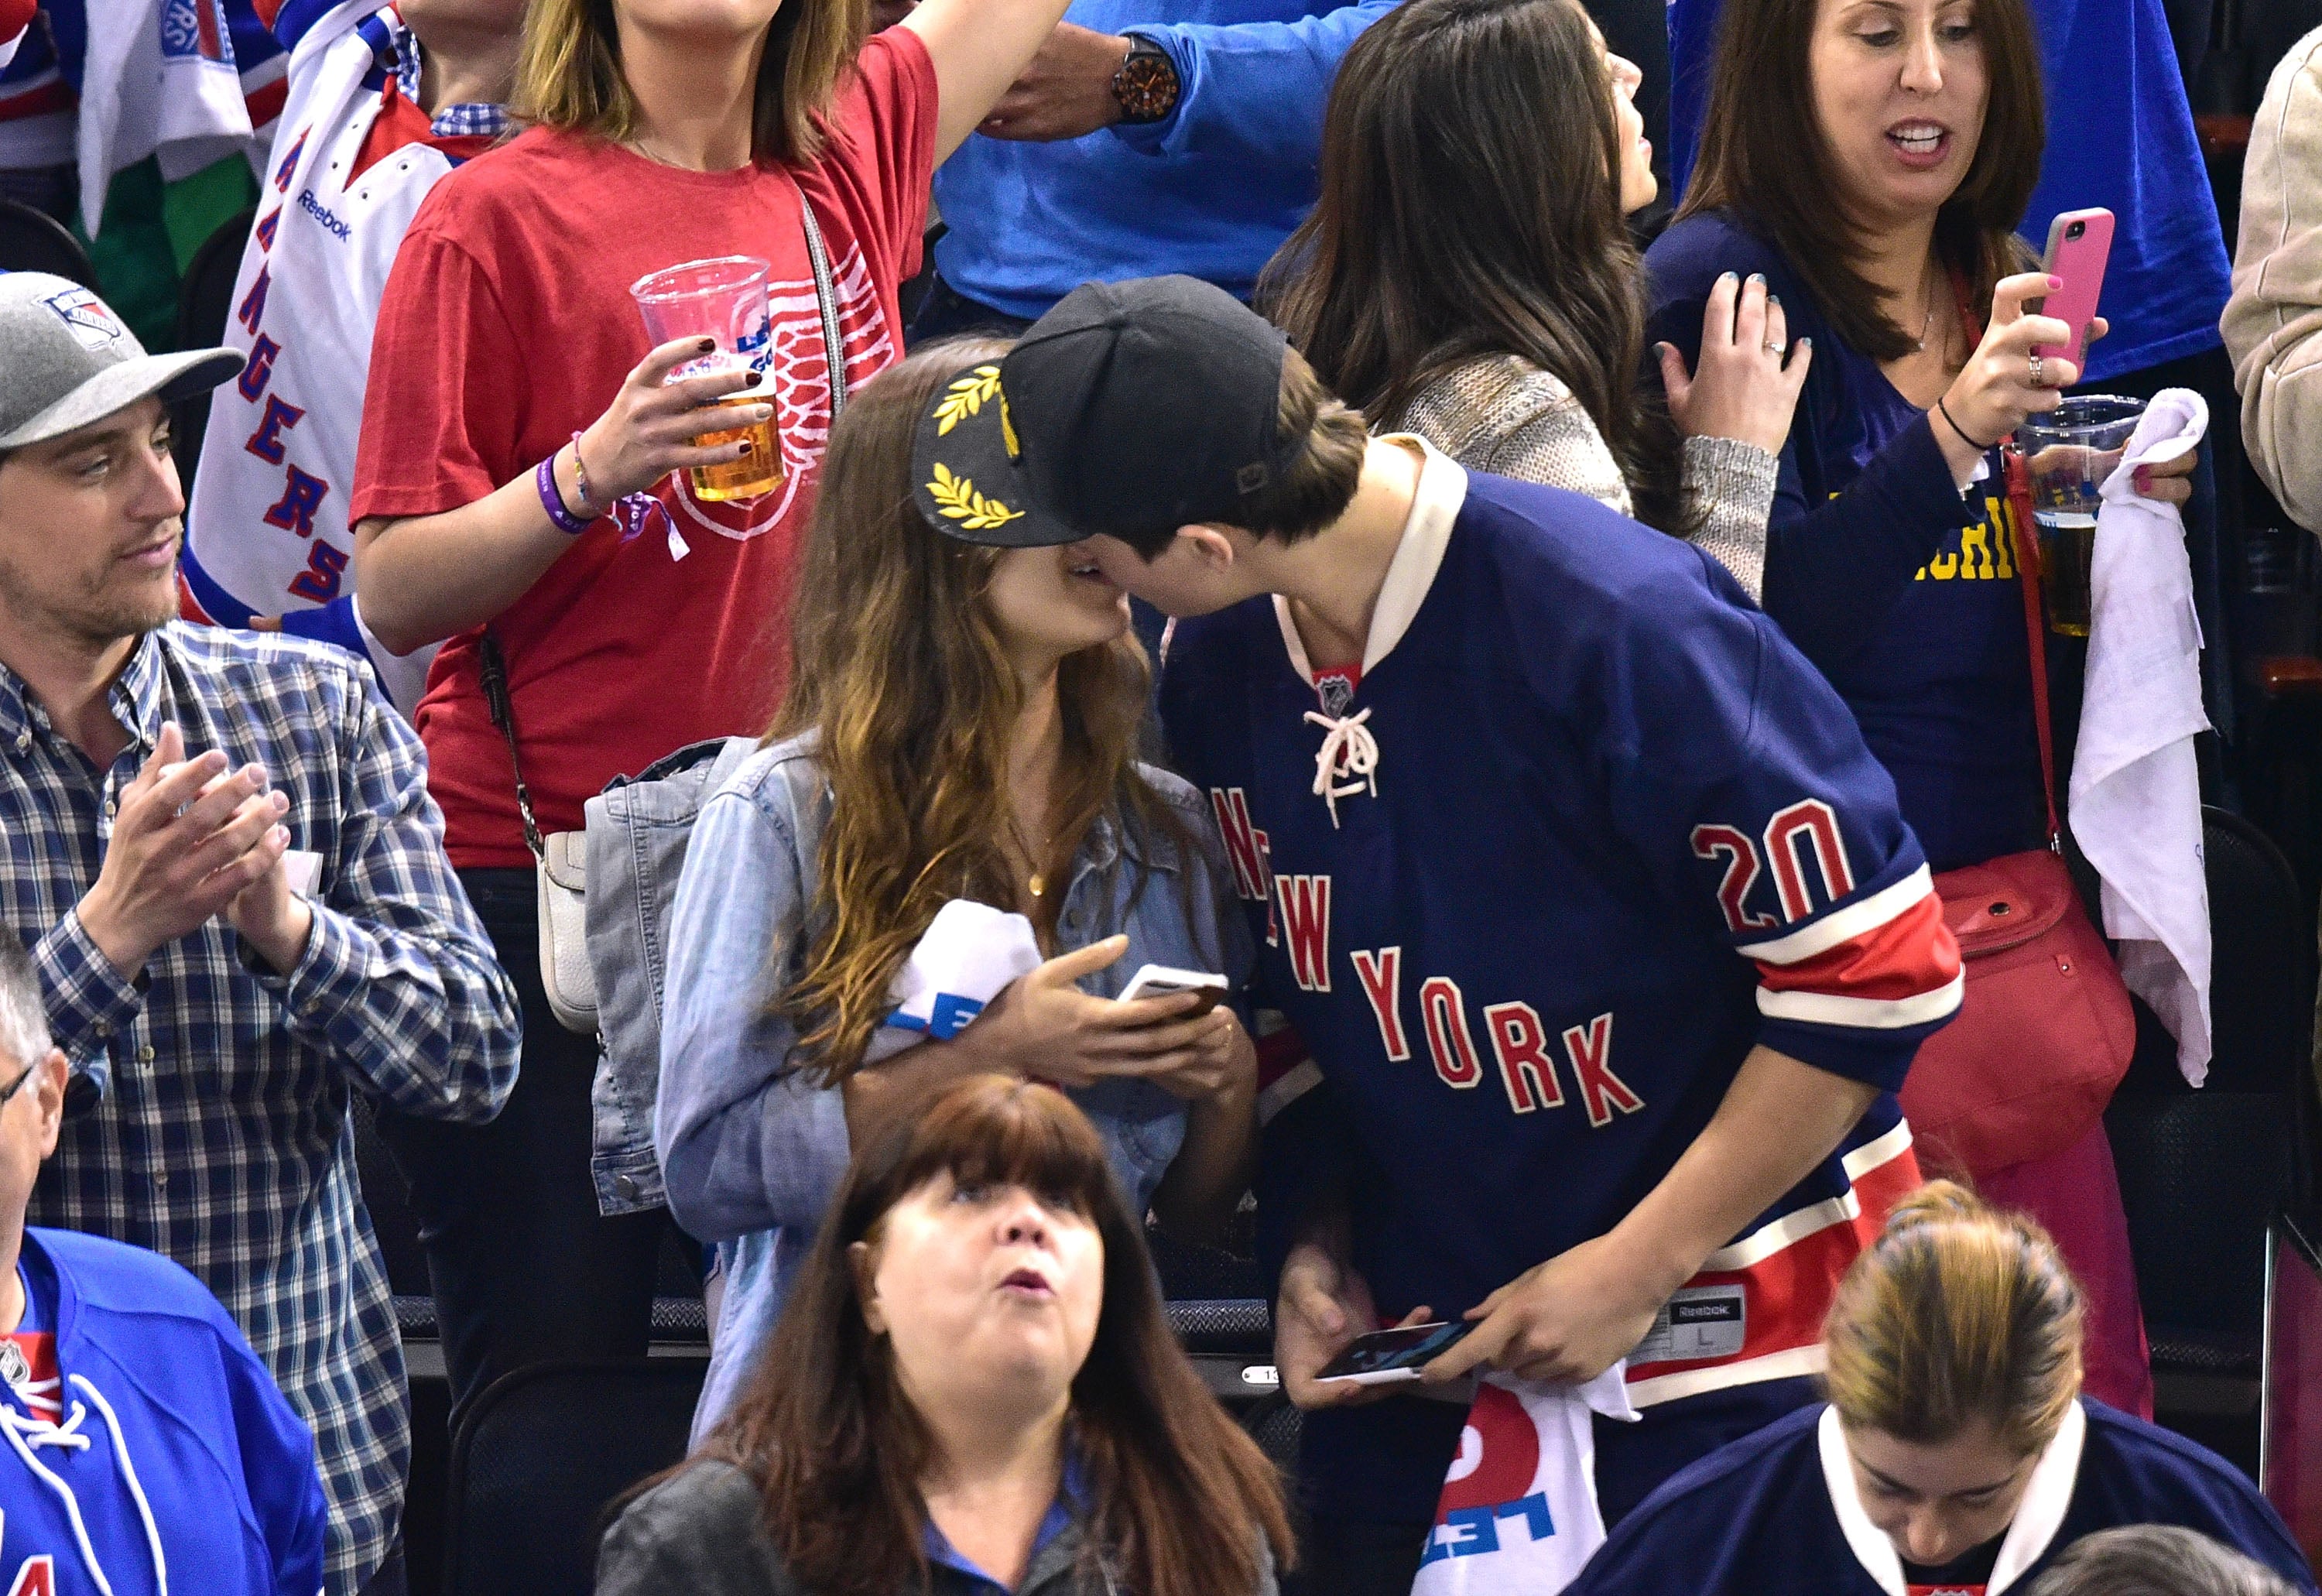 We Want to Go to a Hockey Game With Ansel Elgort